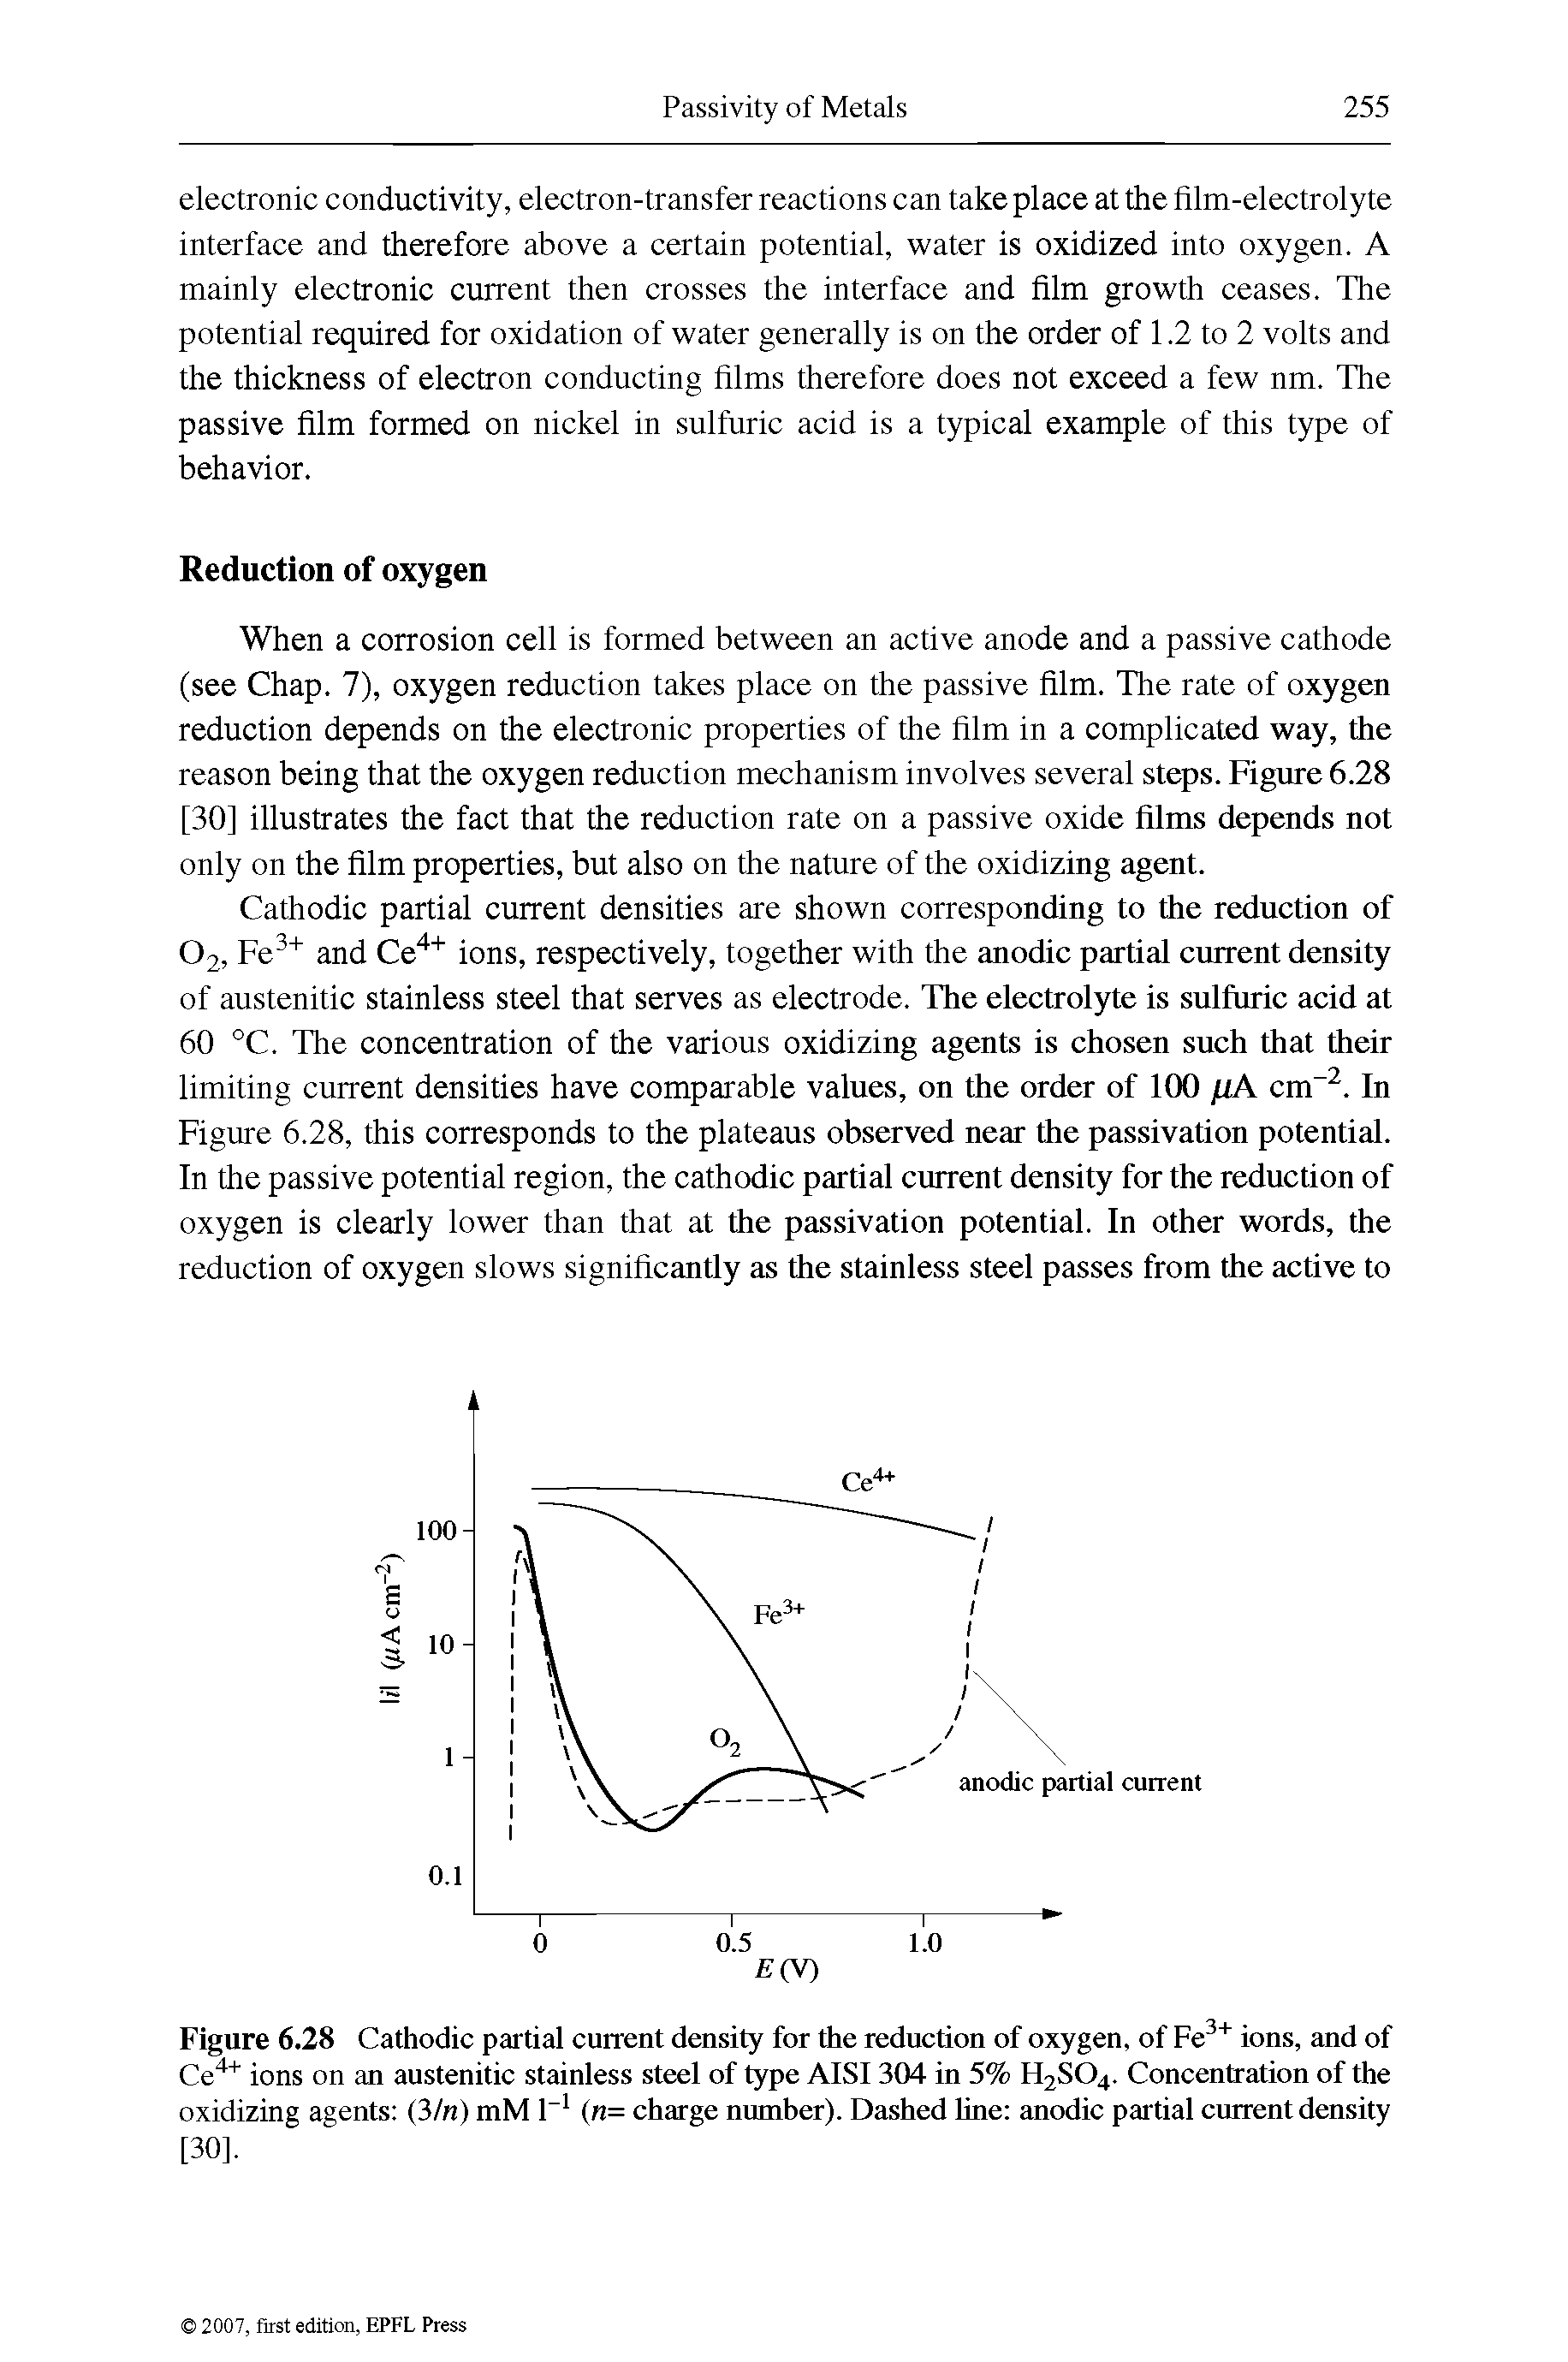 Figure 6.28 Cathodic partial current density for the reduction of oxygen, of Fe ions, and of Ce ions on an austenitic stainless steel of type AISI304 in 5% H2SO4. Concentration of the oxidizing agents (3/n) mM 1 (n= charge number). Dashed hne anodic partial current density [30].